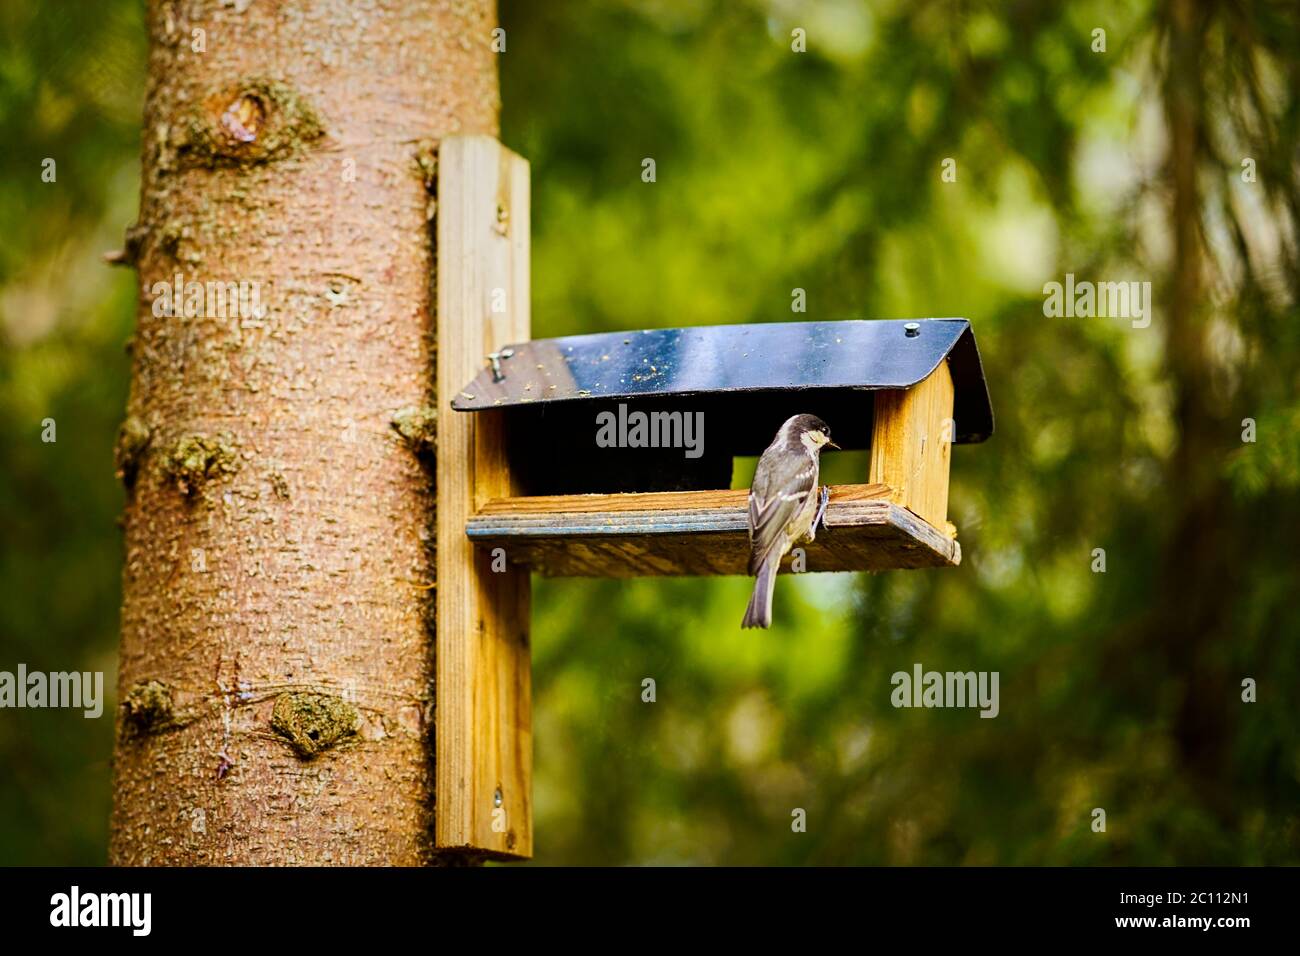 bird eats the grain from the feeder in the summer forest Stock Photo